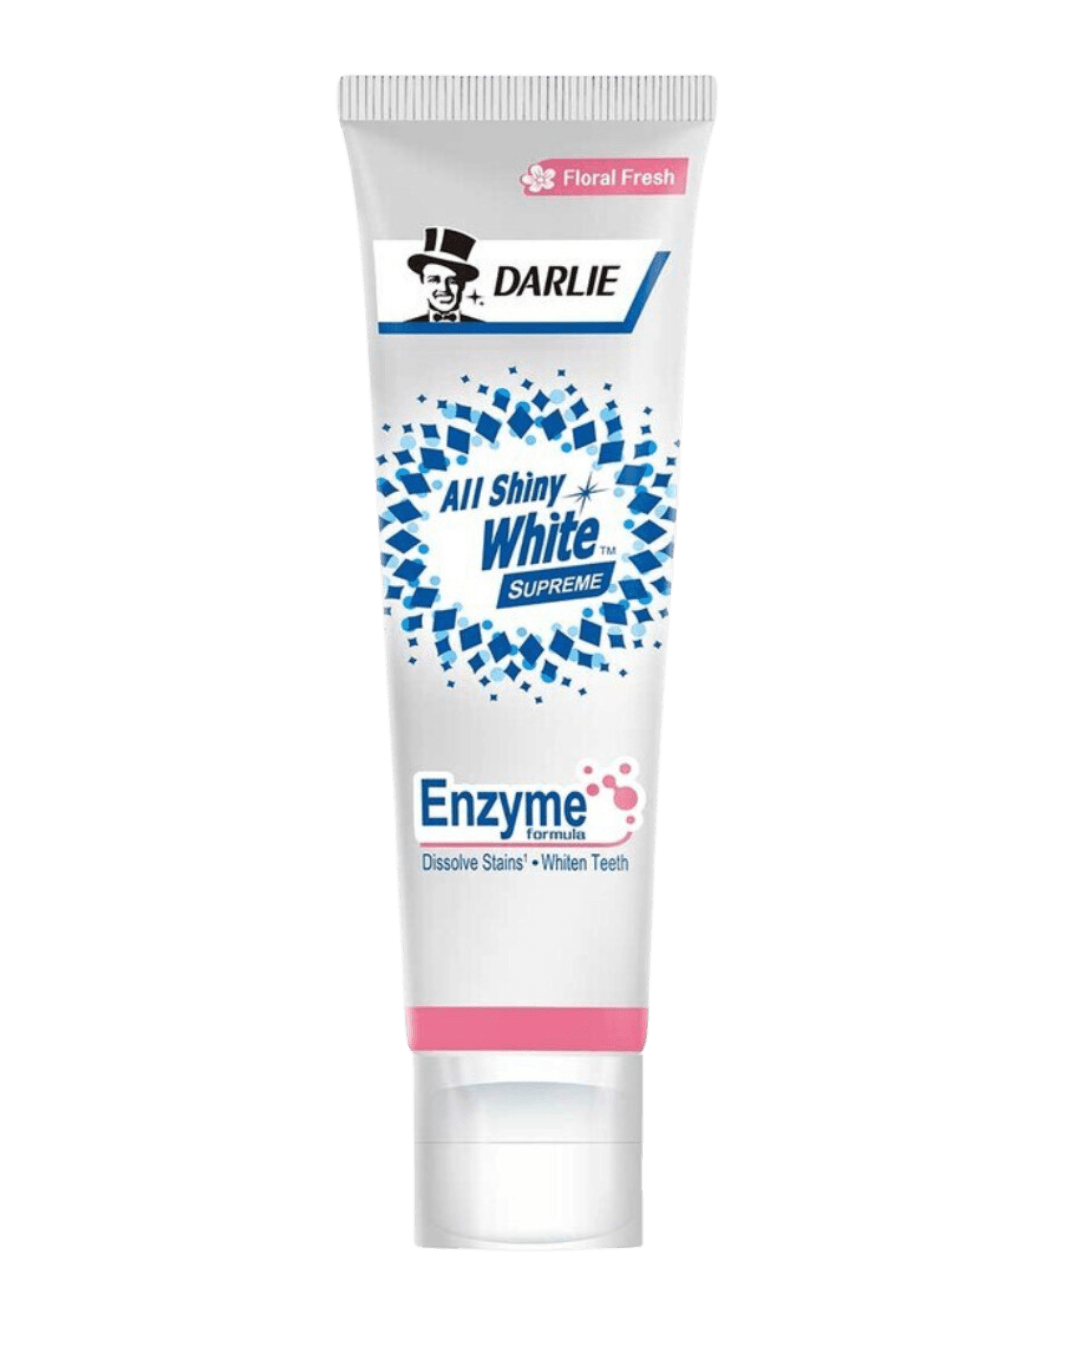 Daily Vanity Beauty Awards 2024 Best  Darlie All Shiny White Supreme Enzyme Whitening Toothpaste Voted By Beauty Experts